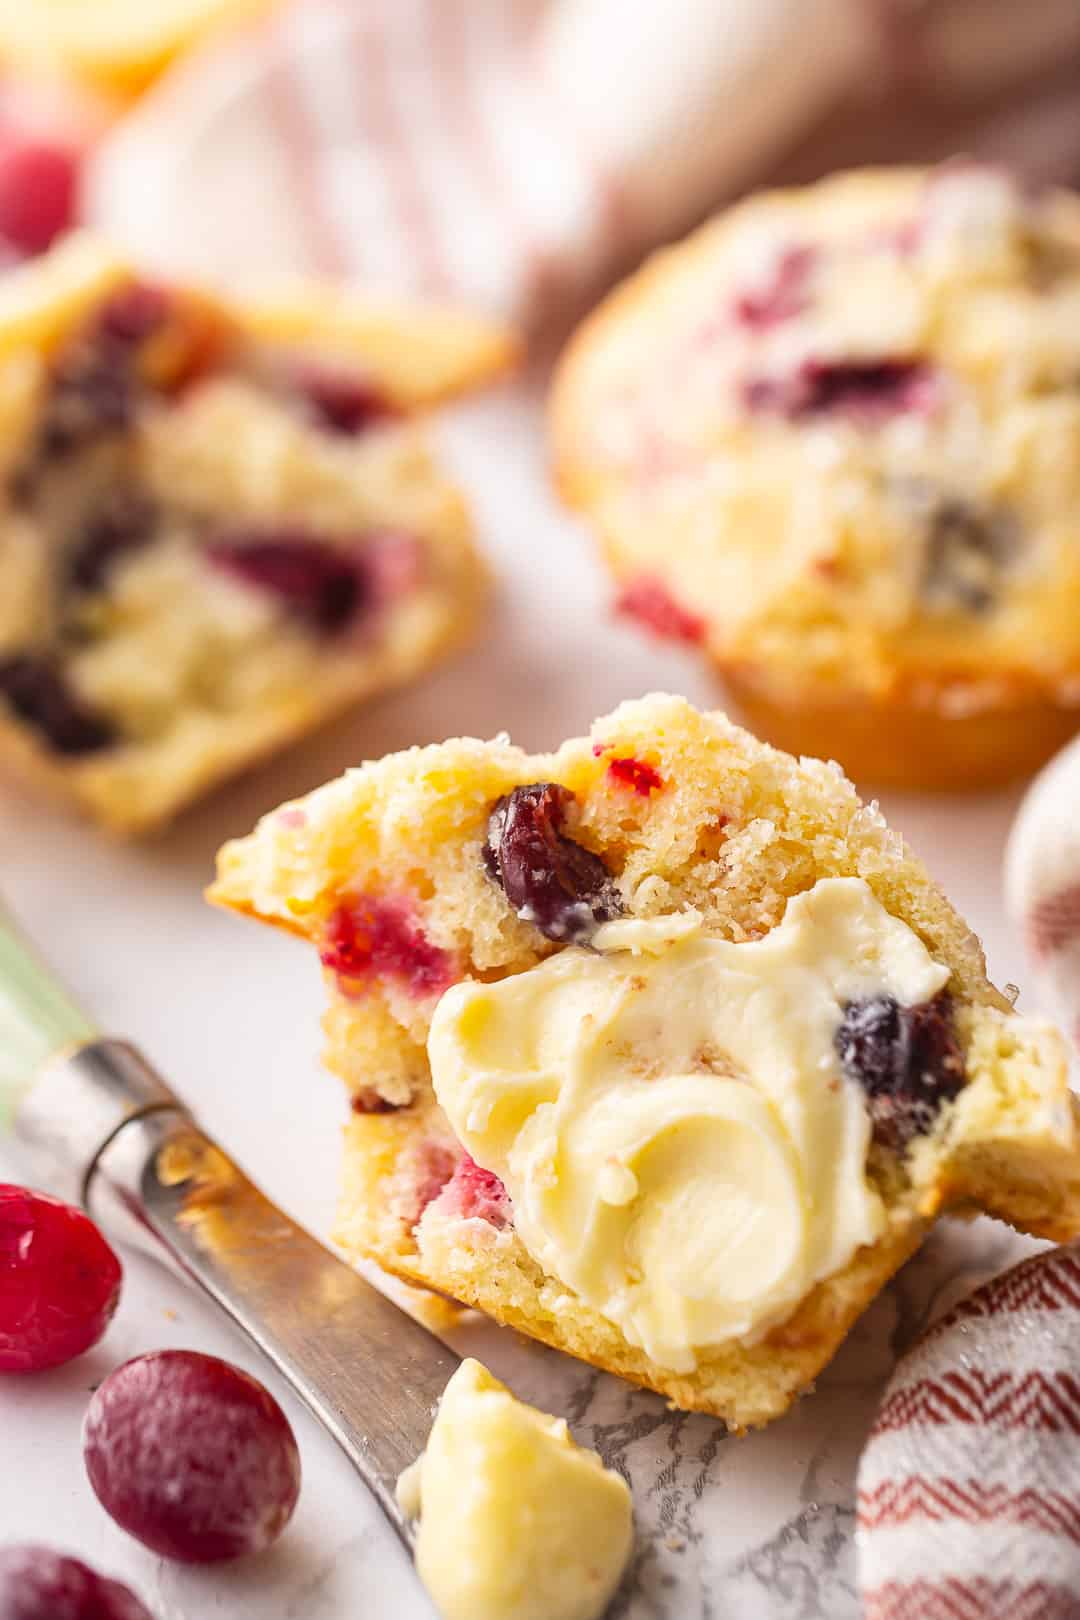 Cranberry orange muffin recipe, baked, split, and slathered with soft butter.